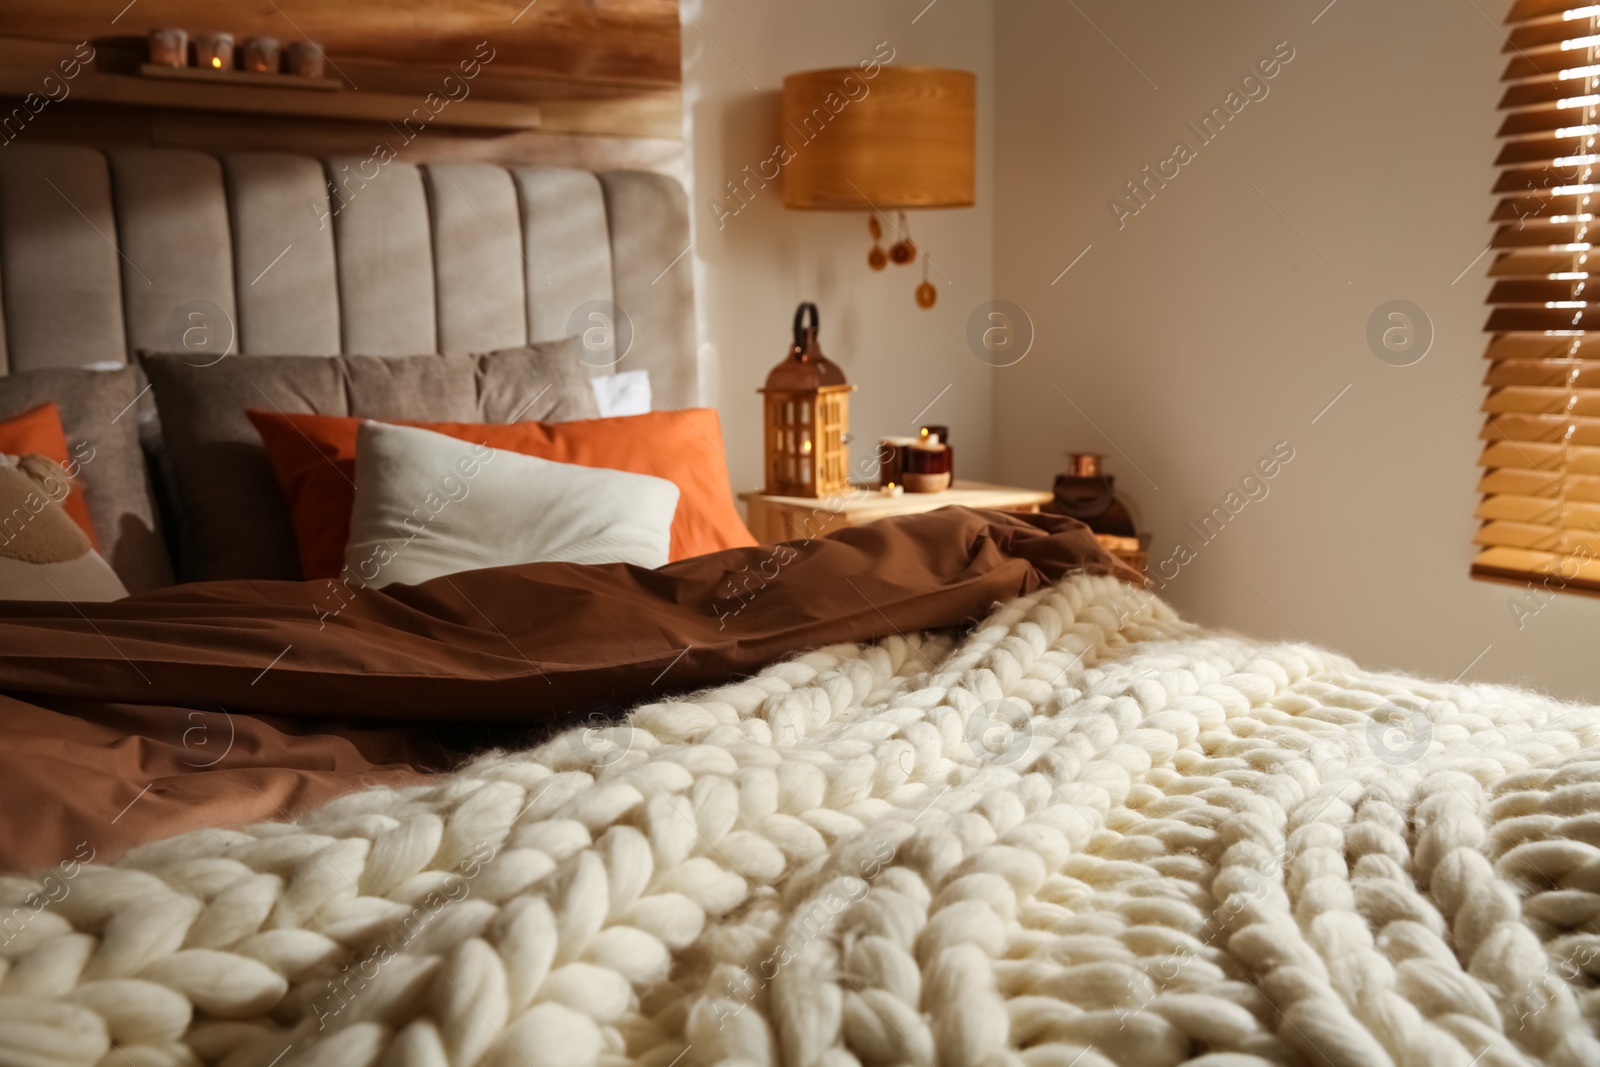 Photo of Bed with knitted blanket and cushions in room. Interior design